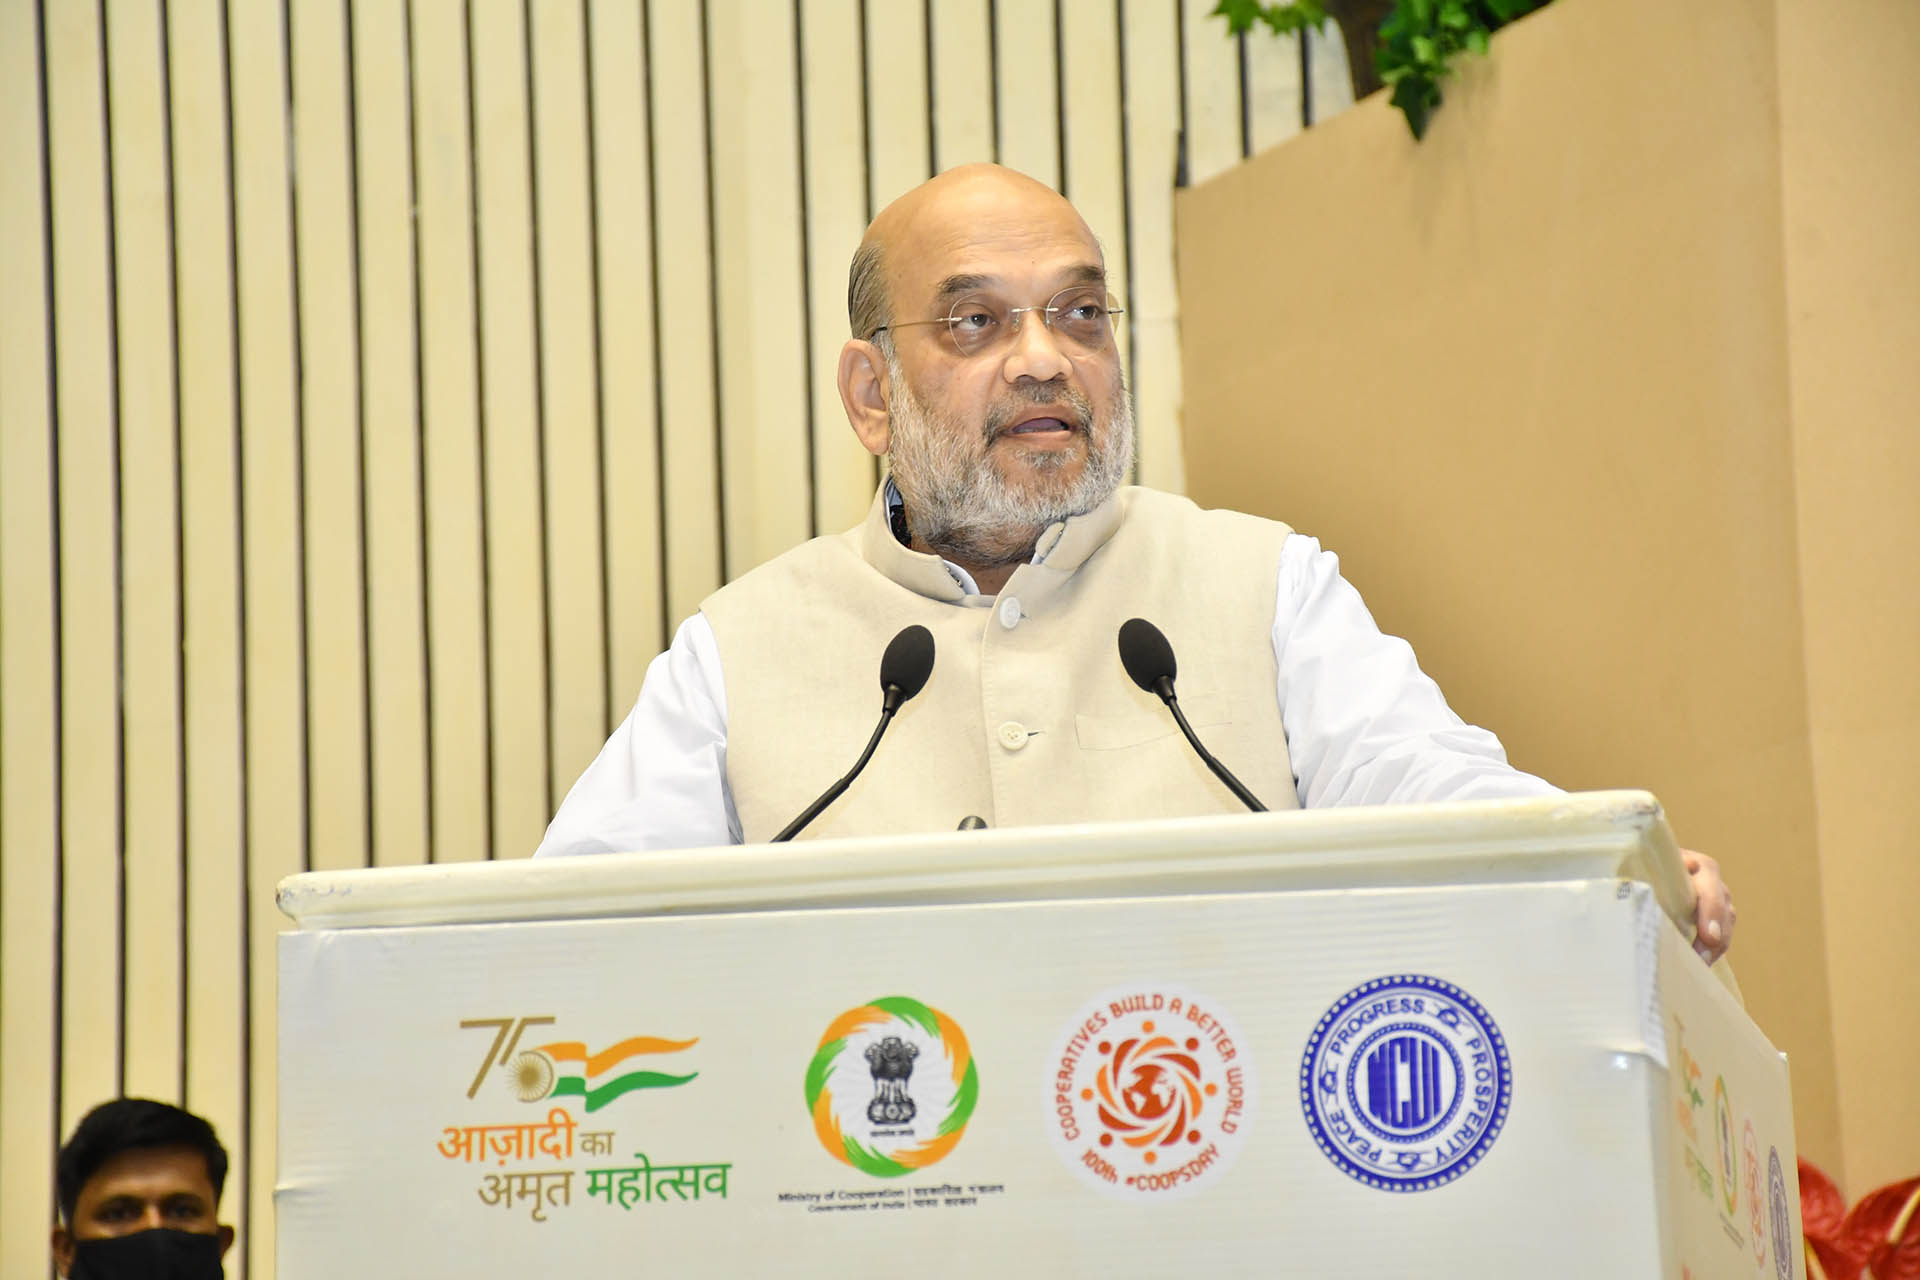 Address by Shri Amit Shah, Hon'ble Union Minister for Home and Cooperation on the occasion of 100 International Day of Cooperatives